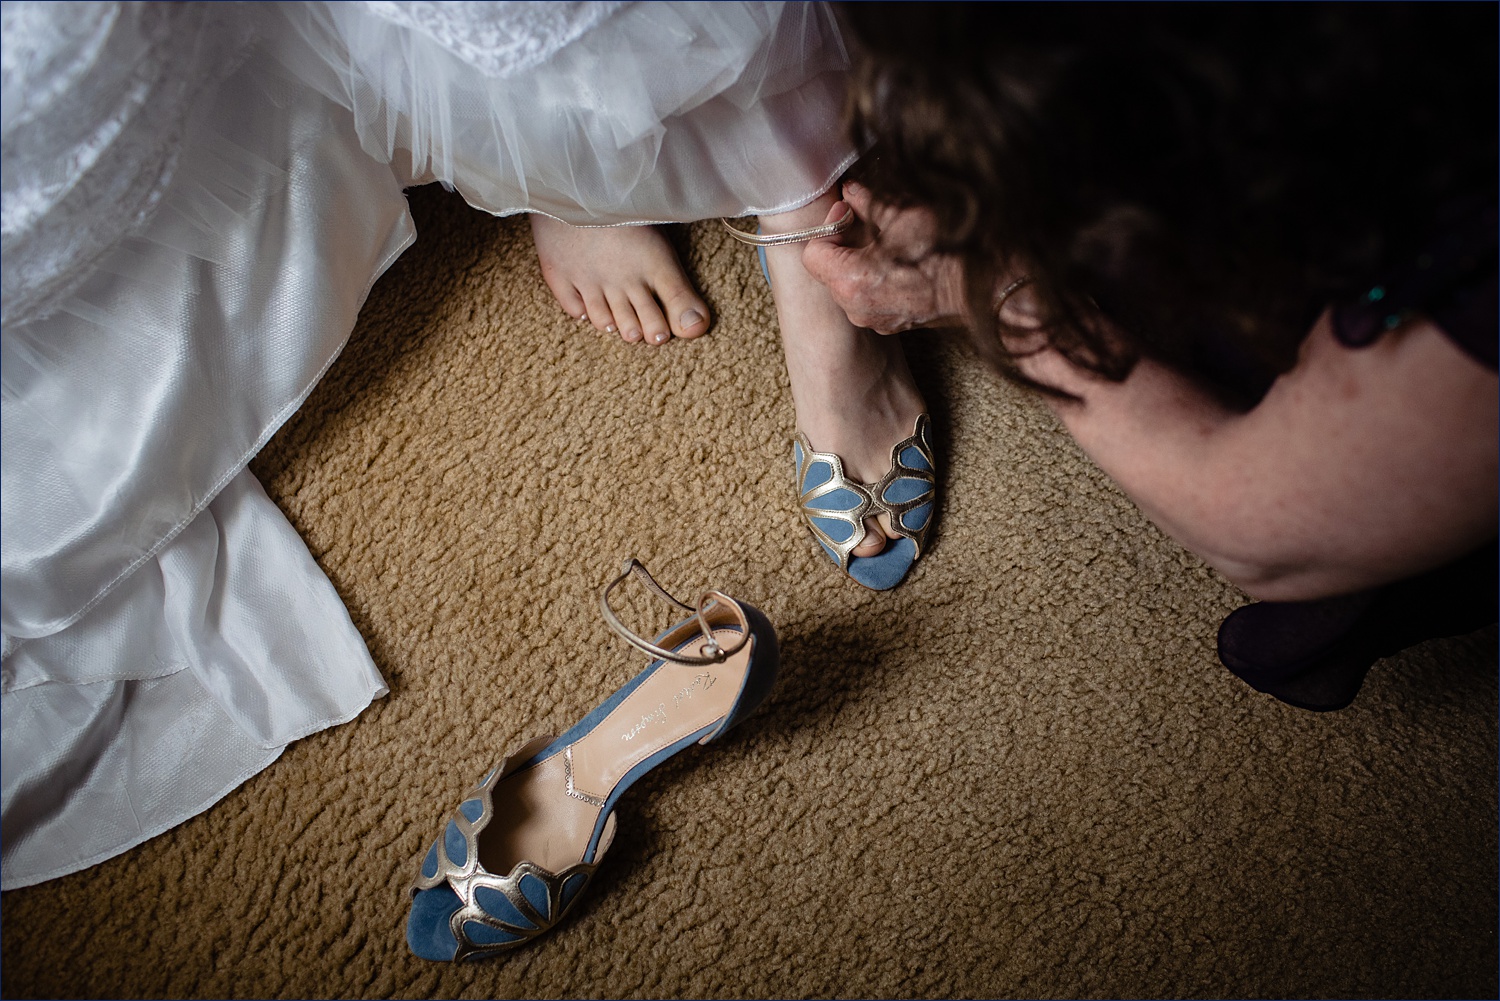 The bride gets her wedding day shoes on with a little help